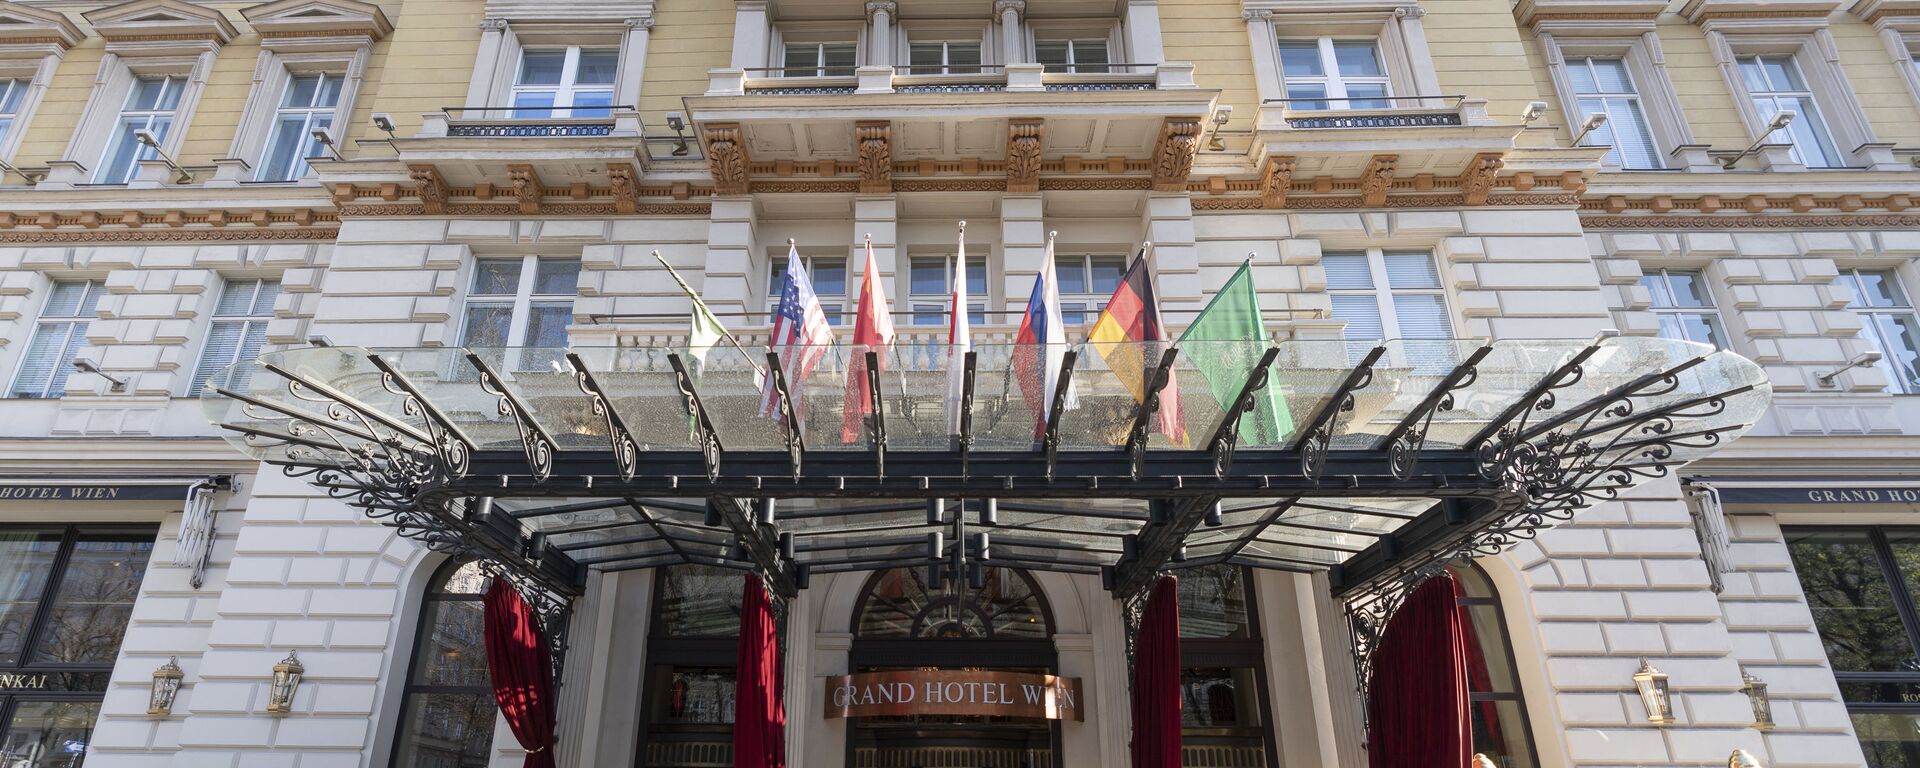 Exterior view of the 'Grand Hotel Wien' in Vienna, Austria, Friday, April 9, 2021 where closed-door nuclear talks with Iran take place.  - Sputnik International, 1920, 27.10.2021